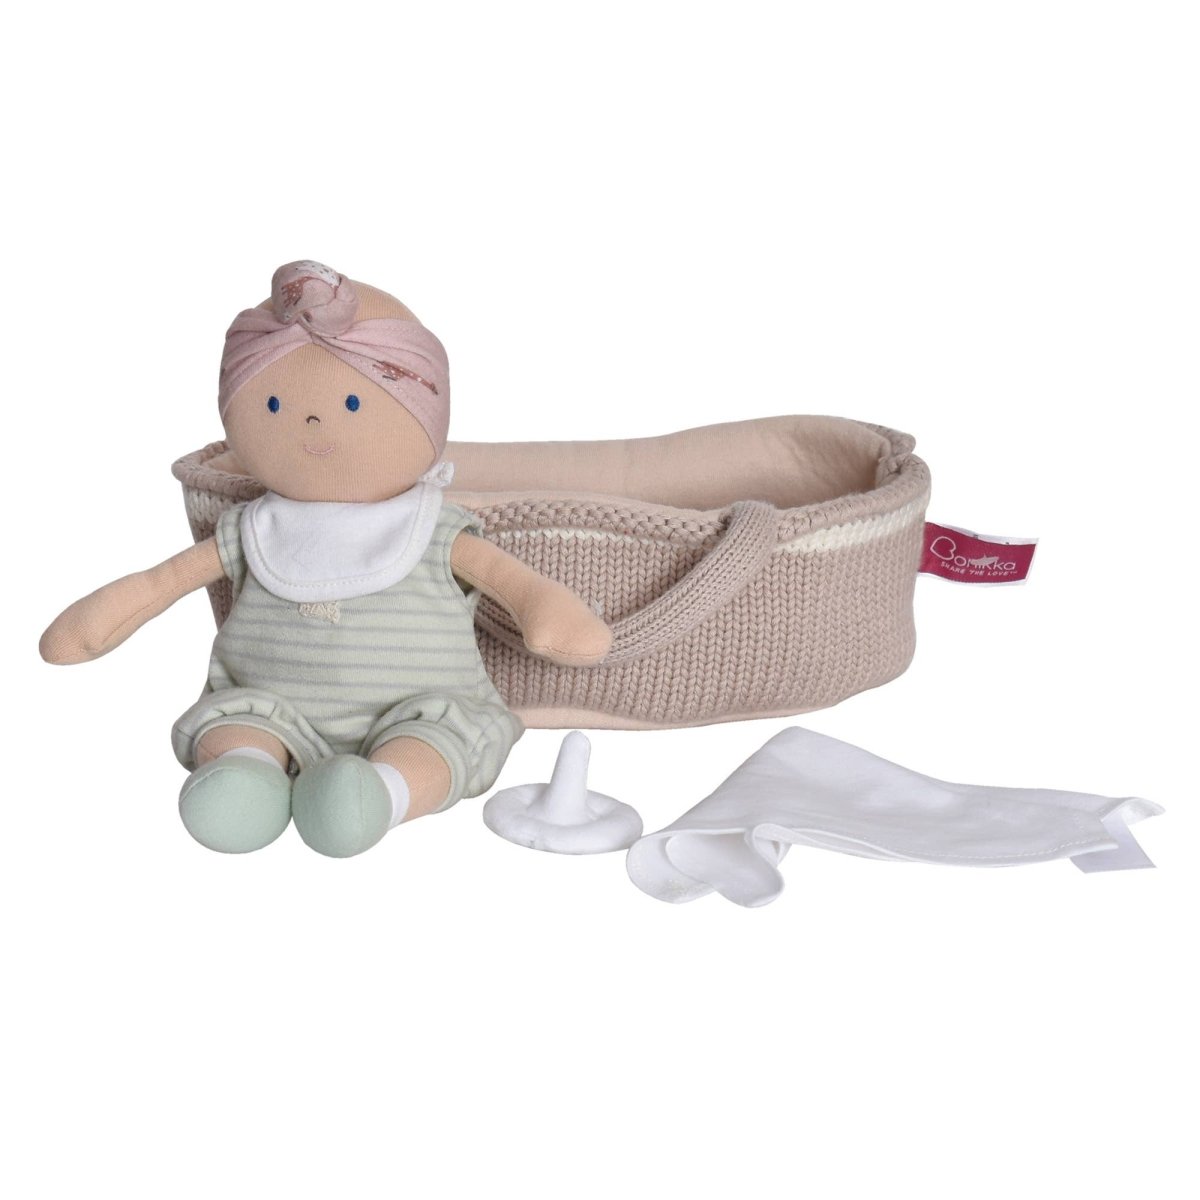 Knitted Carry Cot w/Remi Baby Light Skin, Soother & Blanket